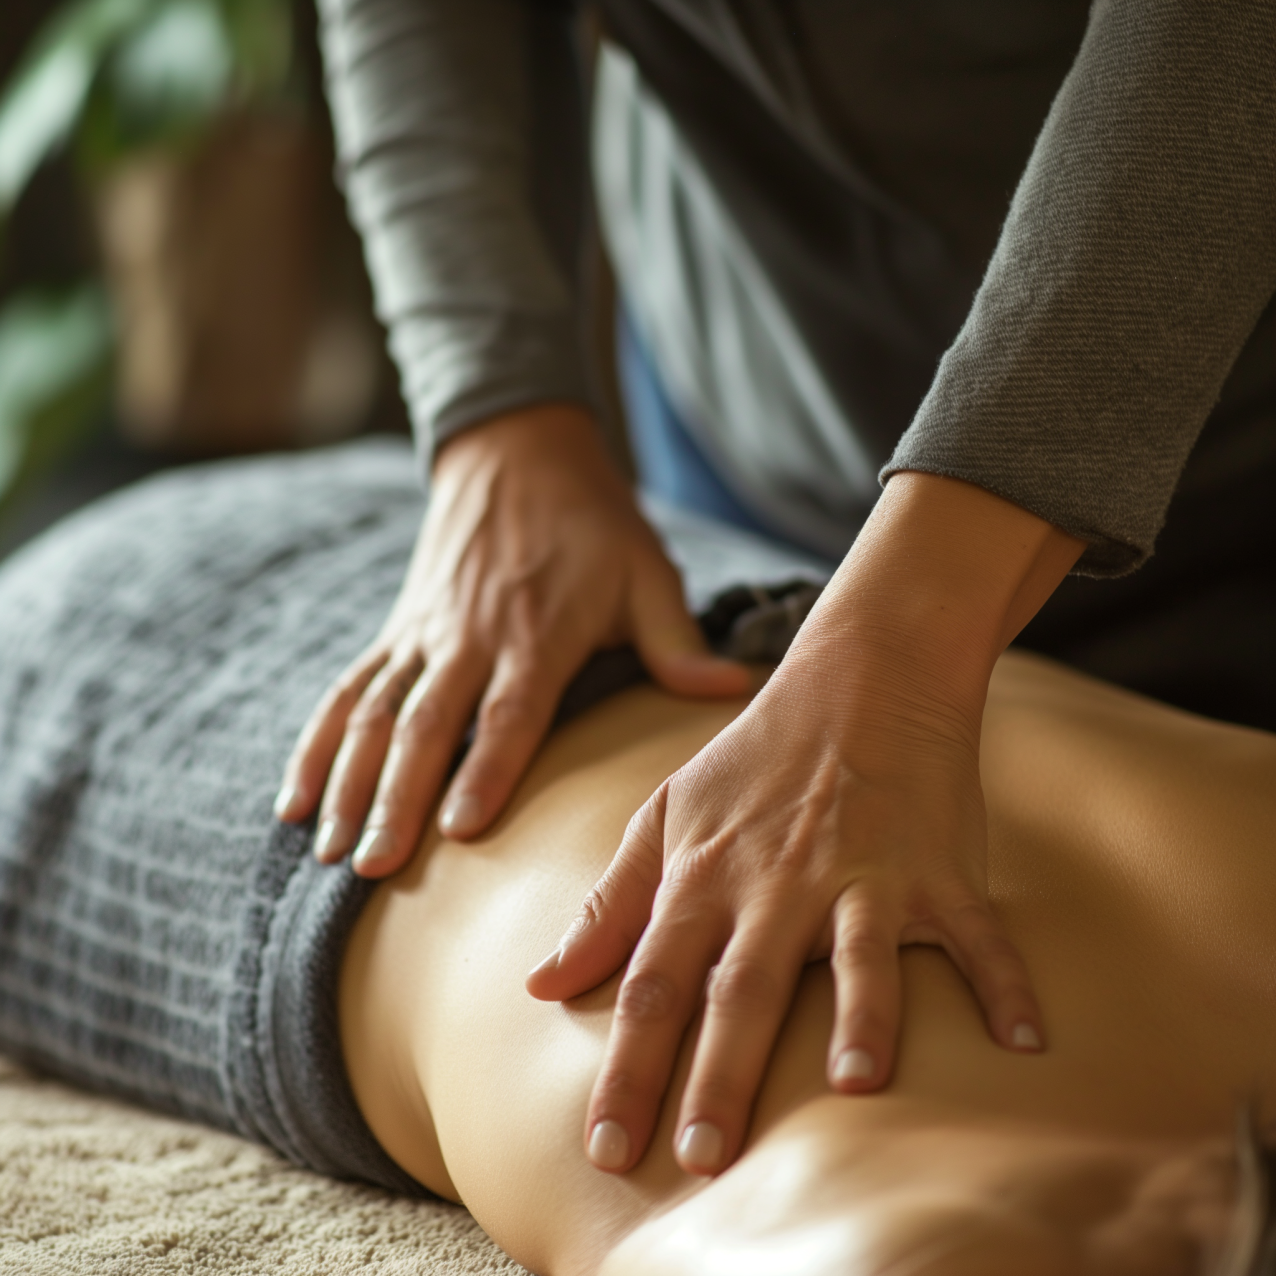 Someone lying on their stomach receiving a massage. The therapists hands are visible on the patient's back. Depicts chiropractic care and massage